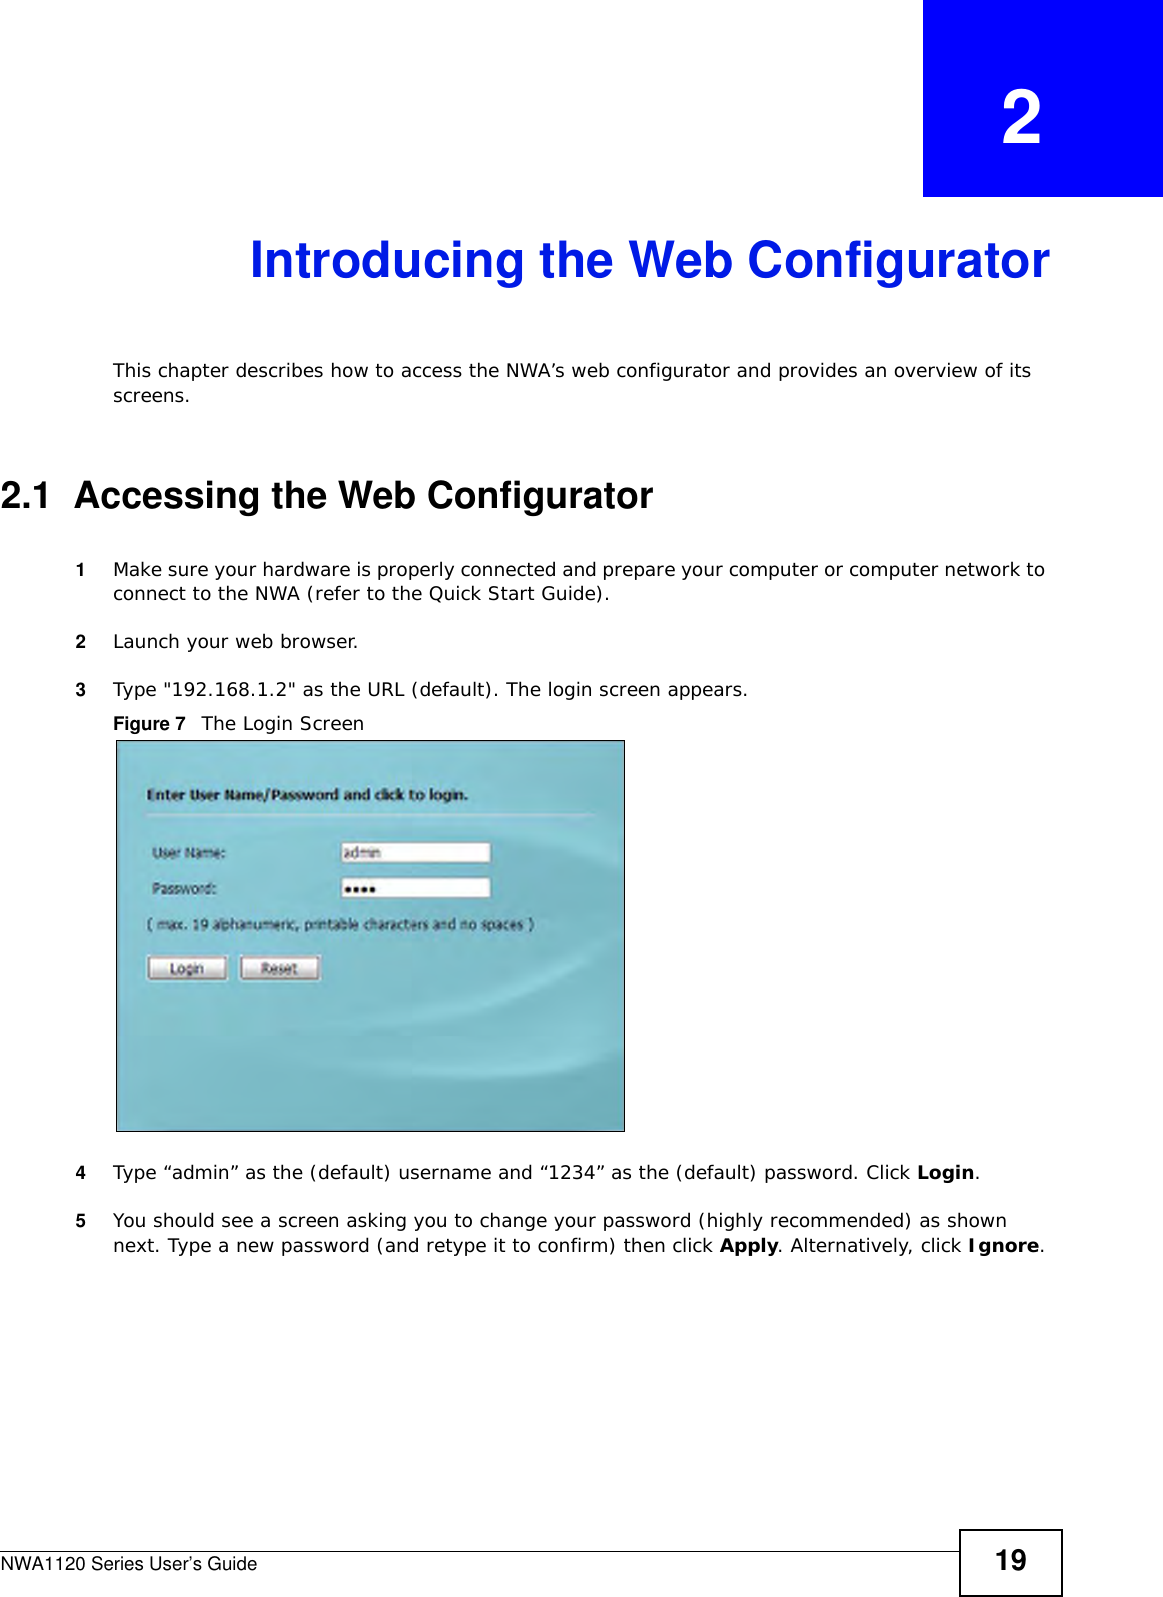 NWA1120 Series User’s Guide 19CHAPTER   2Introducing the Web ConfiguratorThis chapter describes how to access the NWA’s web configurator and provides an overview of its screens. 2.1  Accessing the Web Configurator1Make sure your hardware is properly connected and prepare your computer or computer network to connect to the NWA (refer to the Quick Start Guide).2Launch your web browser.3Type &quot;192.168.1.2&quot; as the URL (default). The login screen appears.Figure 7   The Login Screen4Type “admin” as the (default) username and “1234” as the (default) password. Click Login. 5You should see a screen asking you to change your password (highly recommended) as shown next. Type a new password (and retype it to confirm) then click Apply. Alternatively, click Ignore.